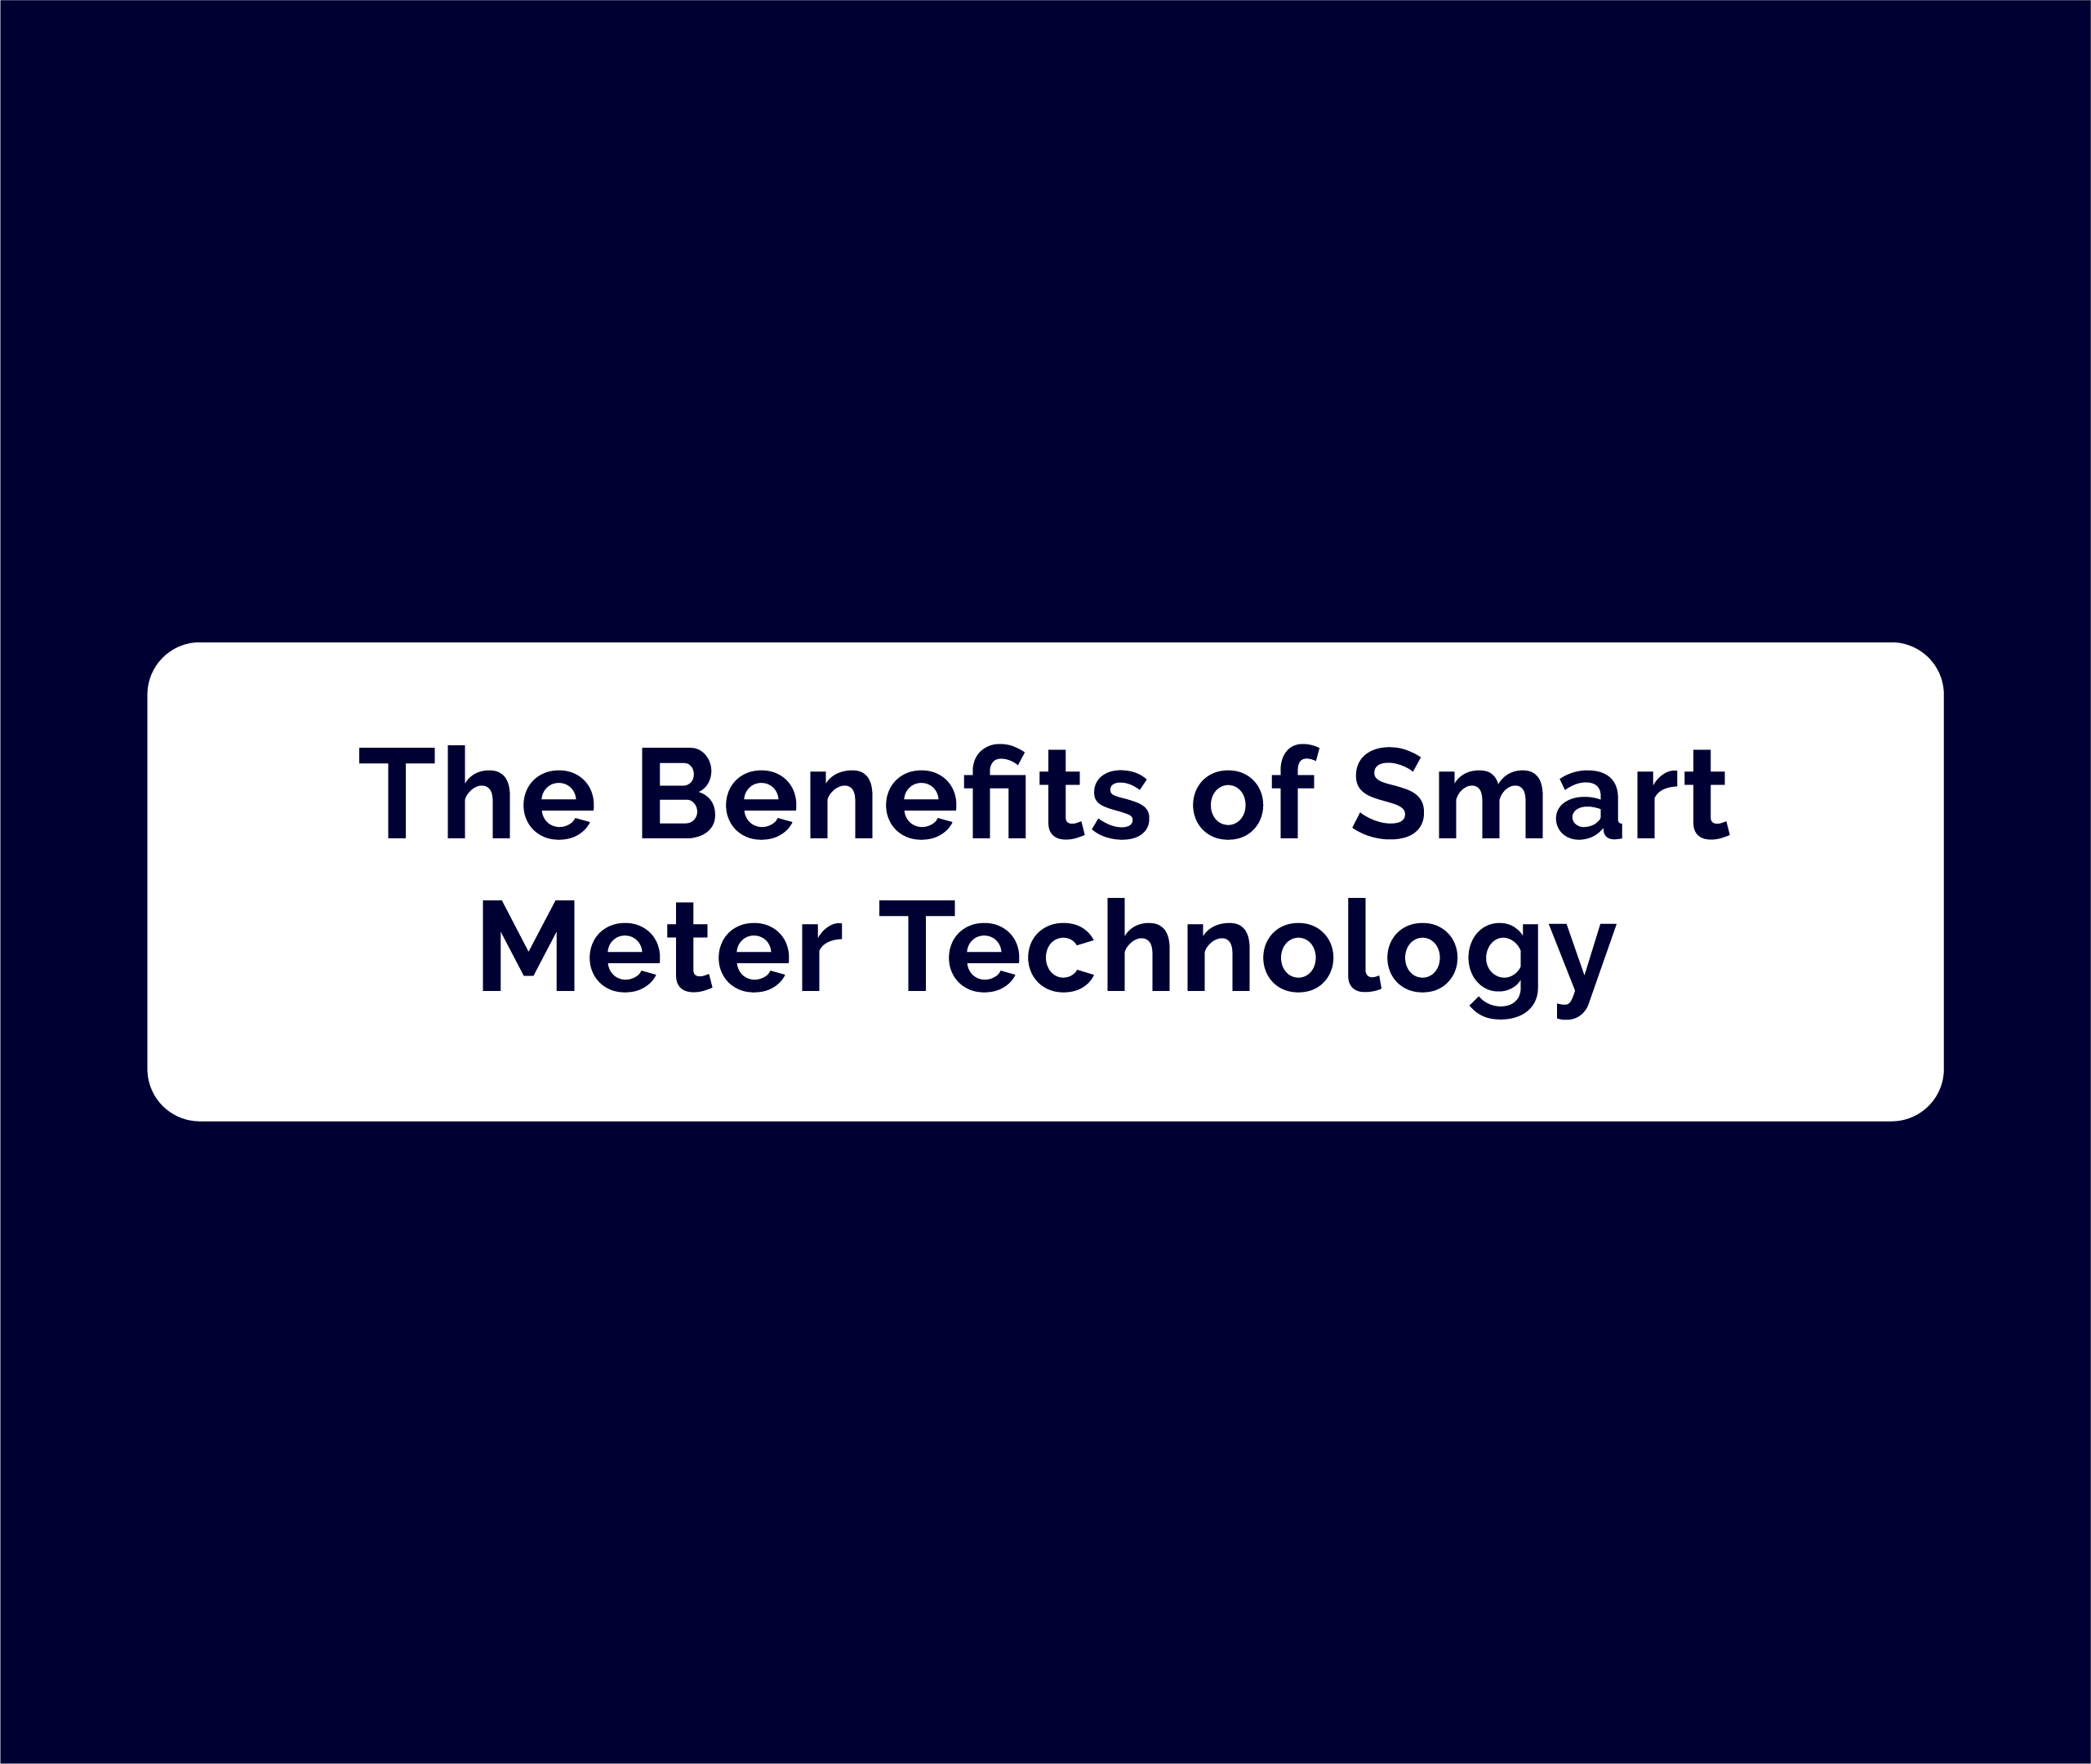 The Benefits of Smart Meter Technology